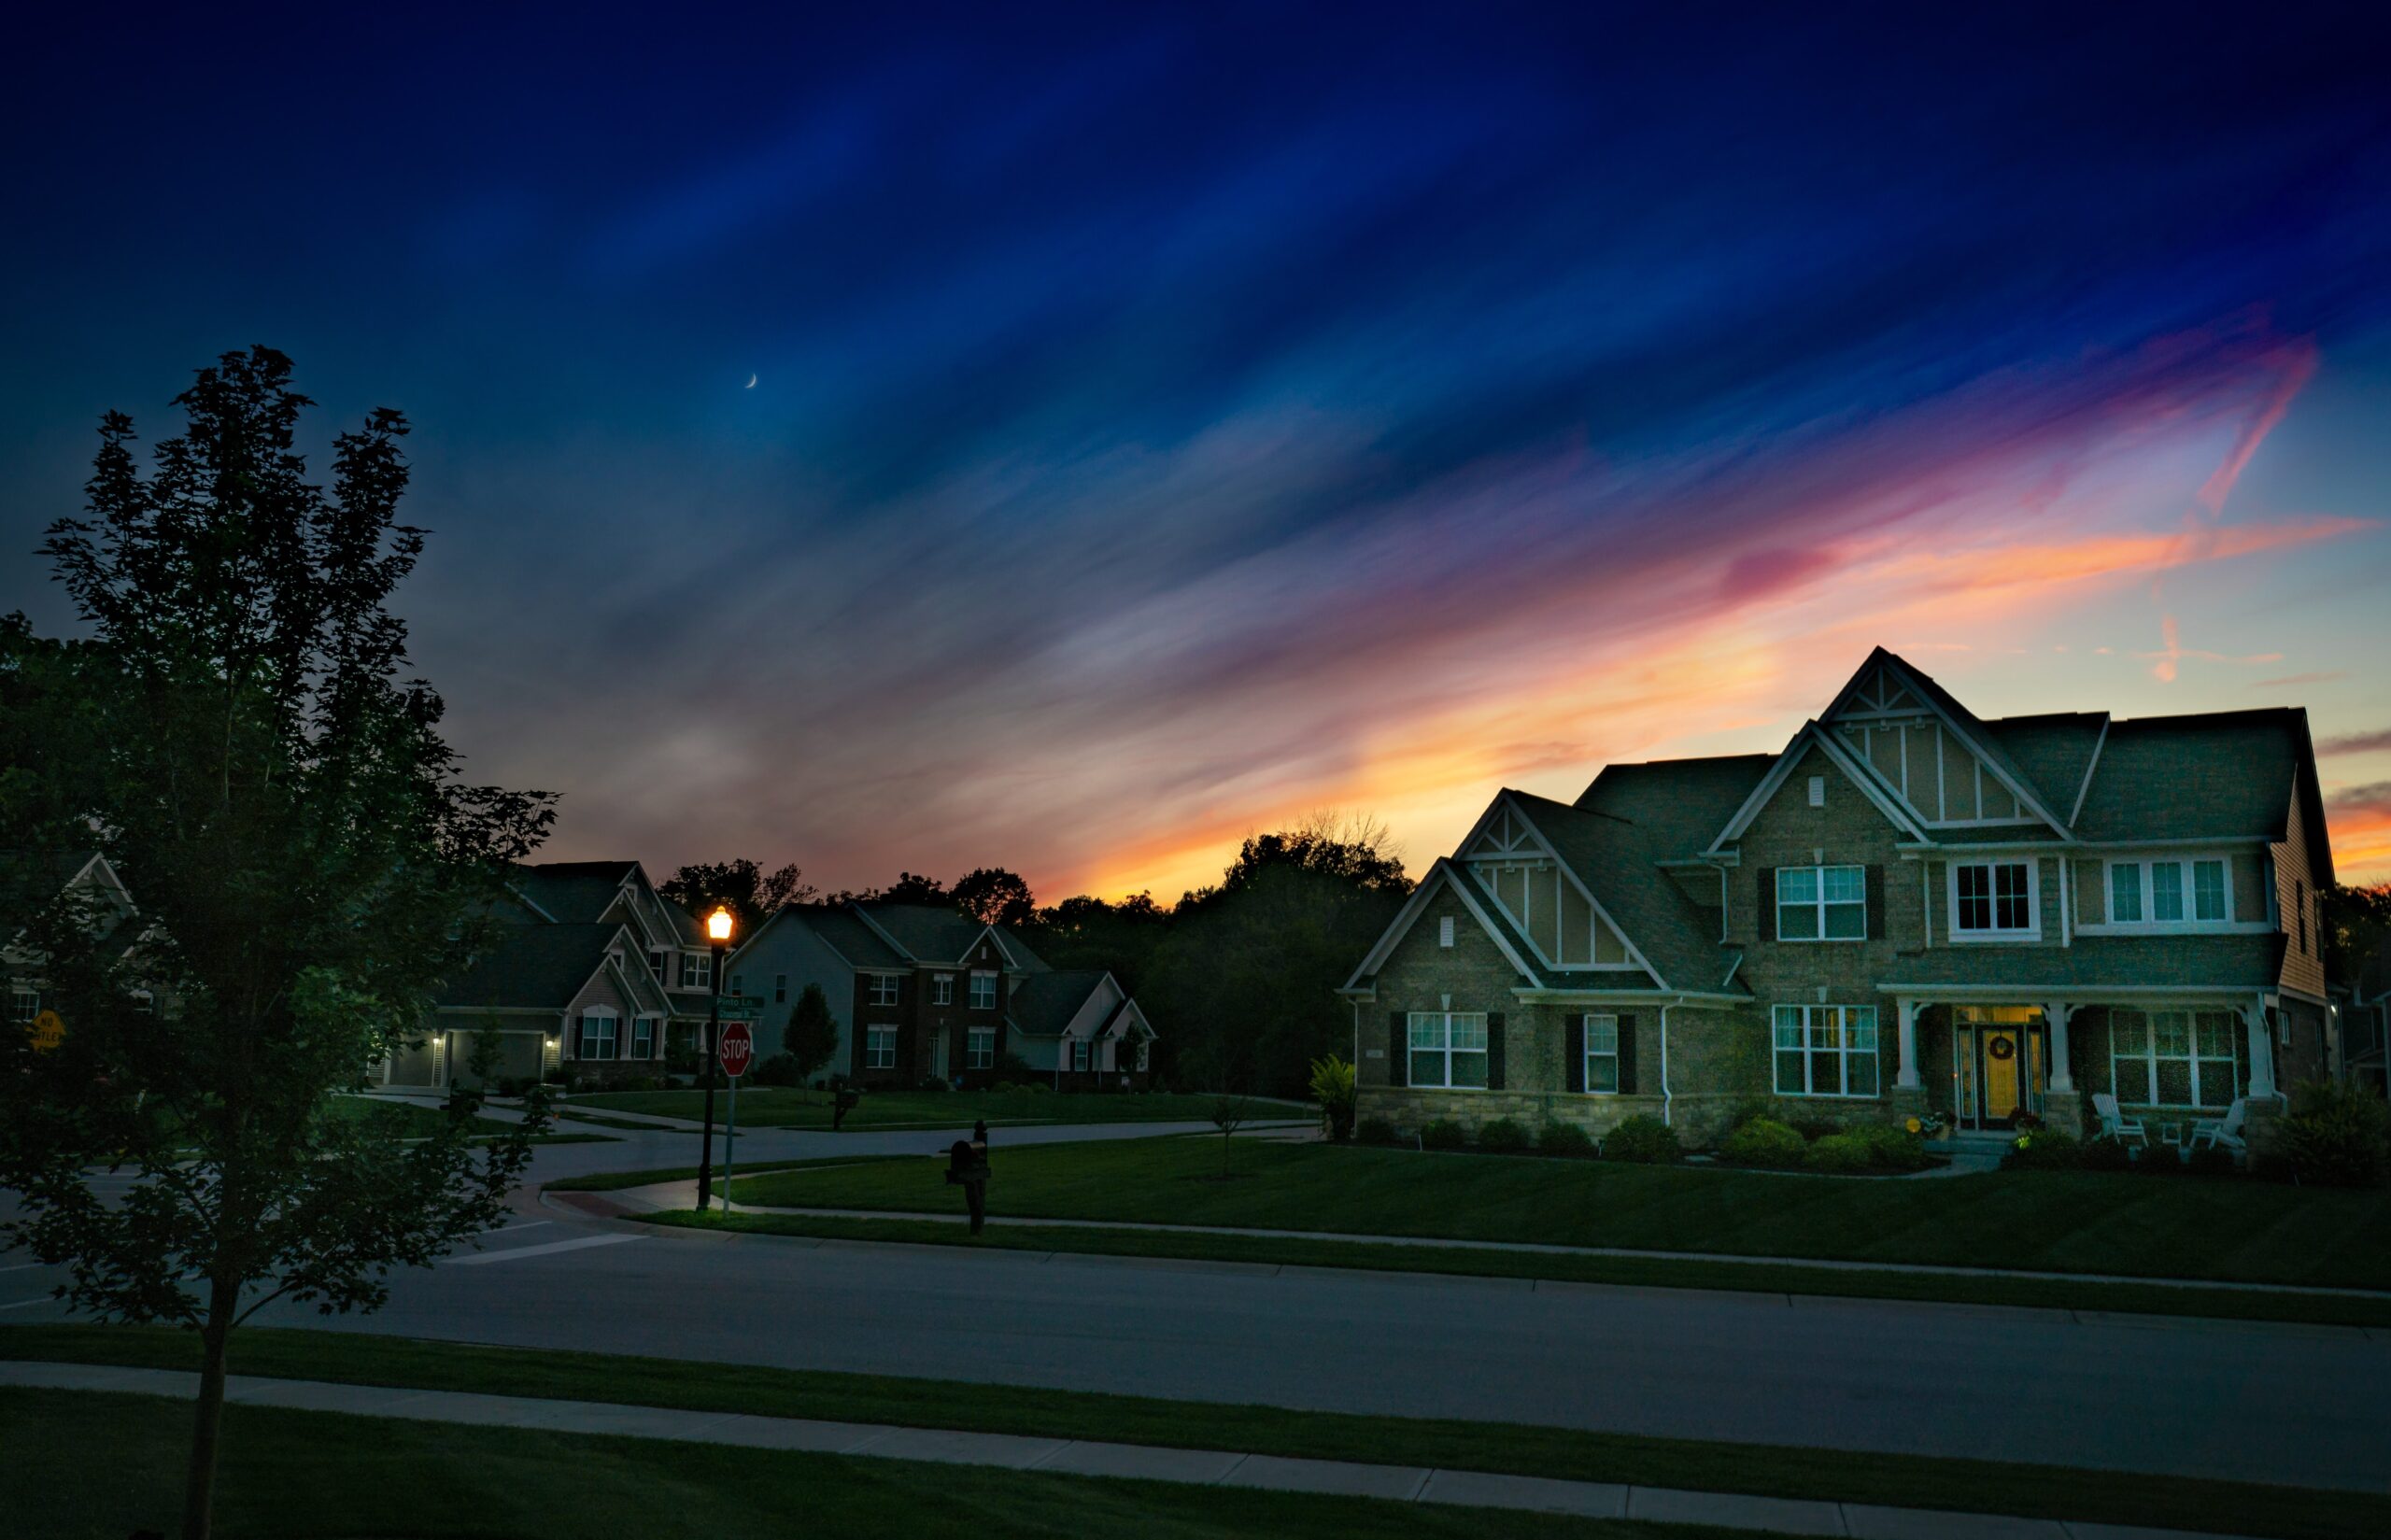 A quiet street with residential homes at dusk 